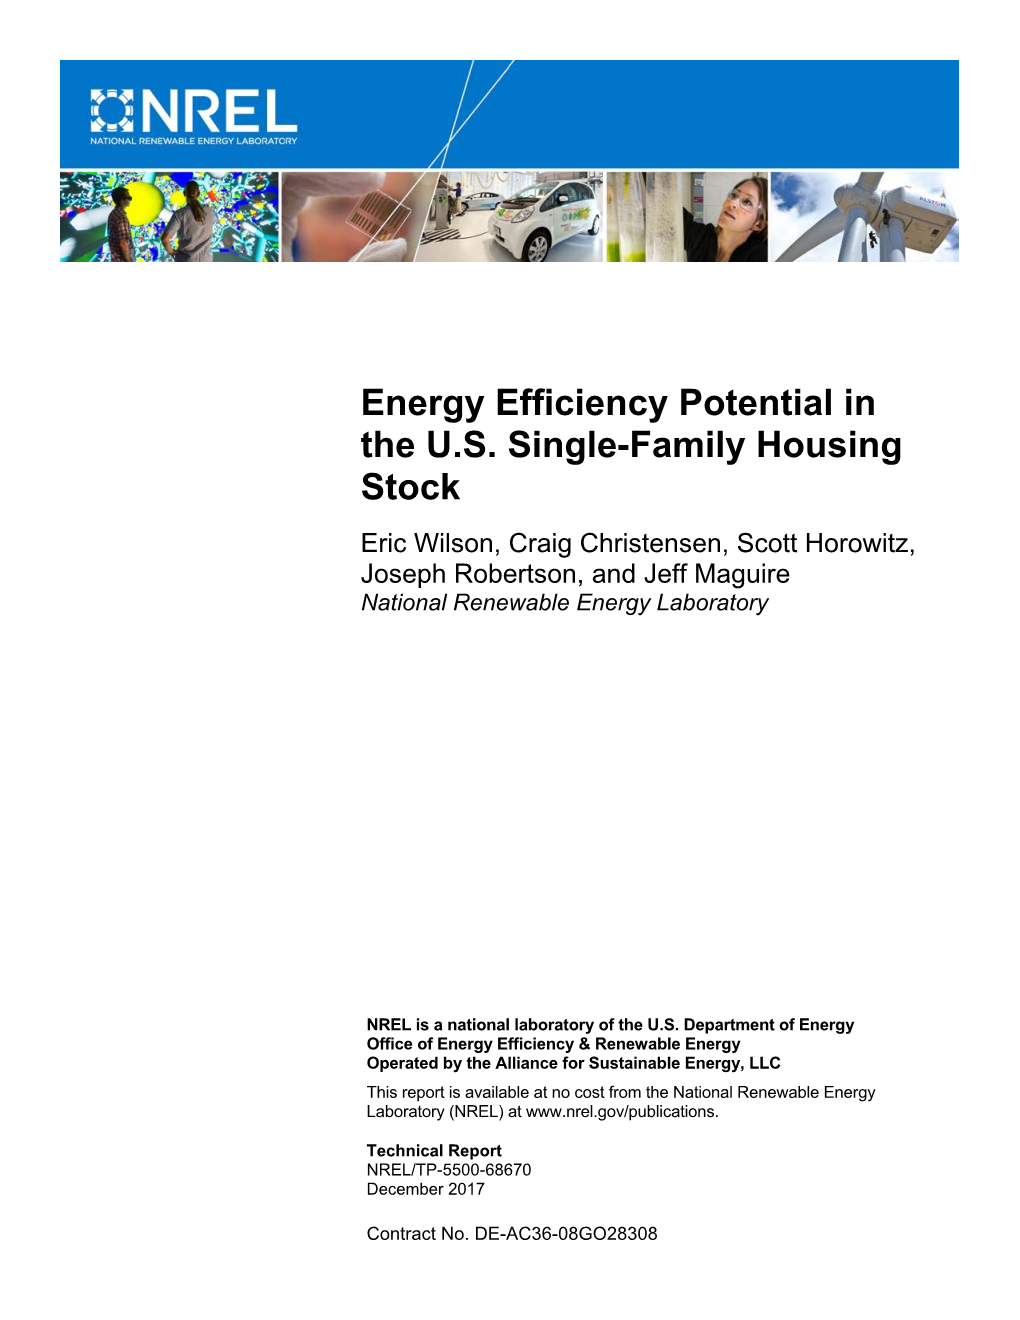 Energy Efficiency Potential in the U.S. Single-Family Housing Stock